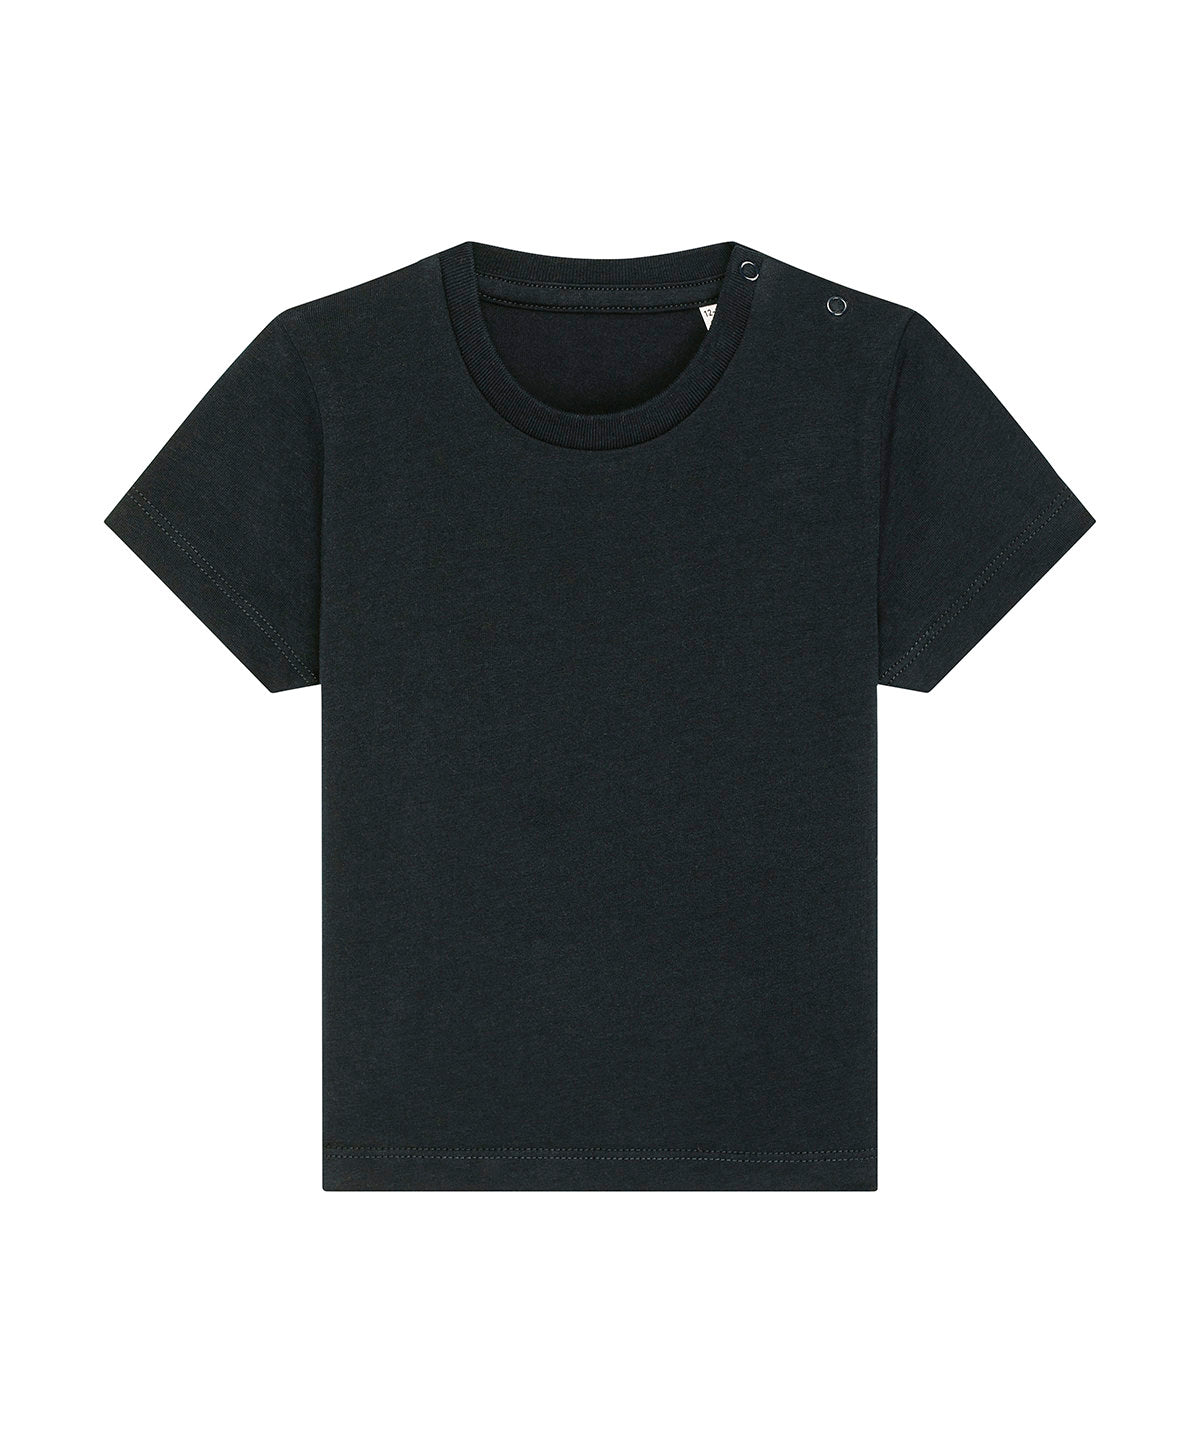 Black - Baby Creator iconic babies' t-shirt (STTB918) T-Shirts Stanley/Stella Baby & Toddler, Exclusives, New Colours for 2023, New Styles For 2022, Organic & Conscious, Stanley/ Stella, T-Shirts & Vests Schoolwear Centres